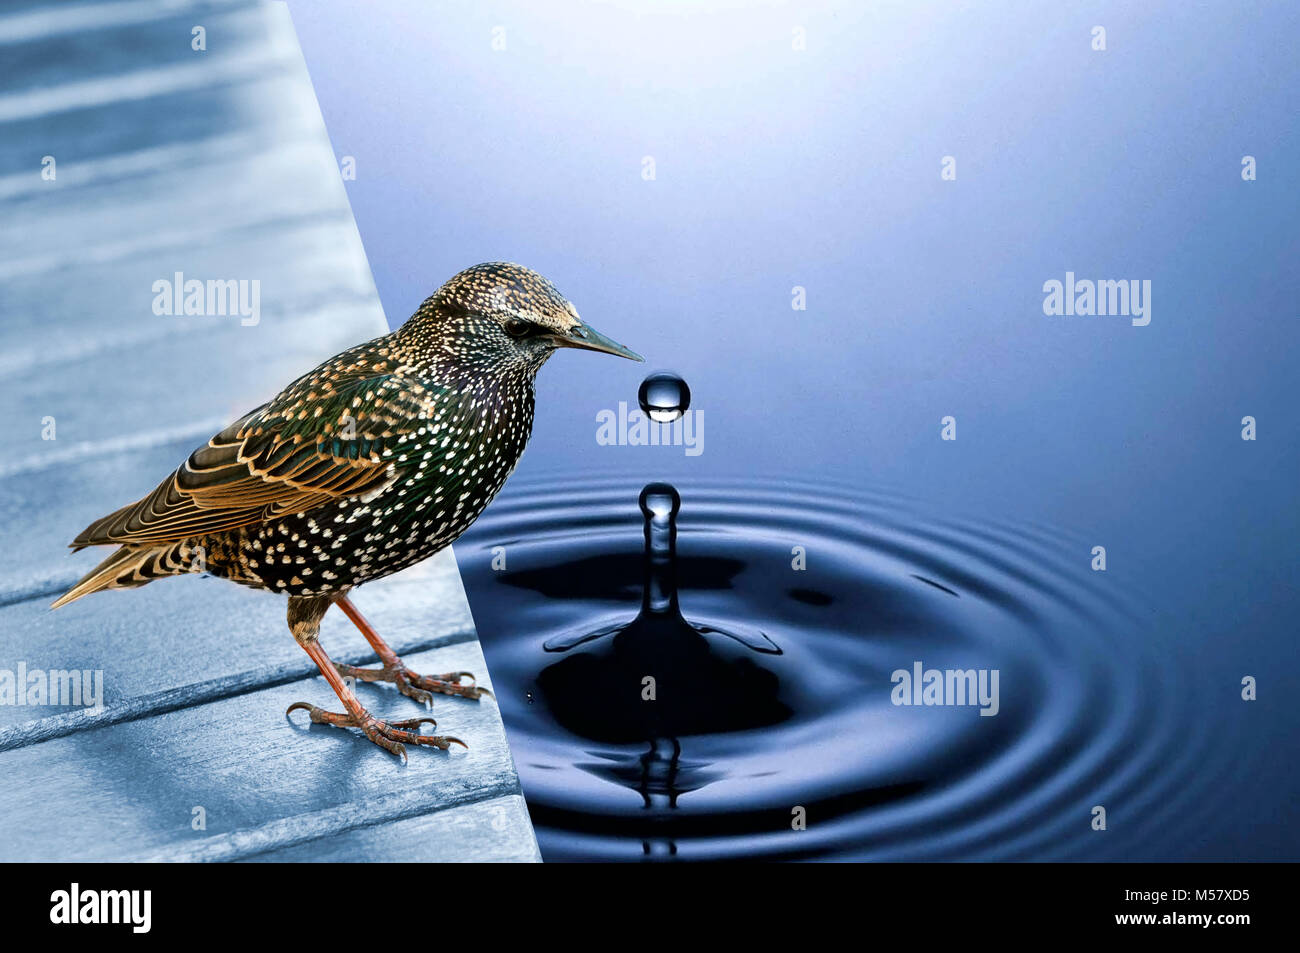 photo composition of a bird by blue water picking up a water drop b Stock Photo